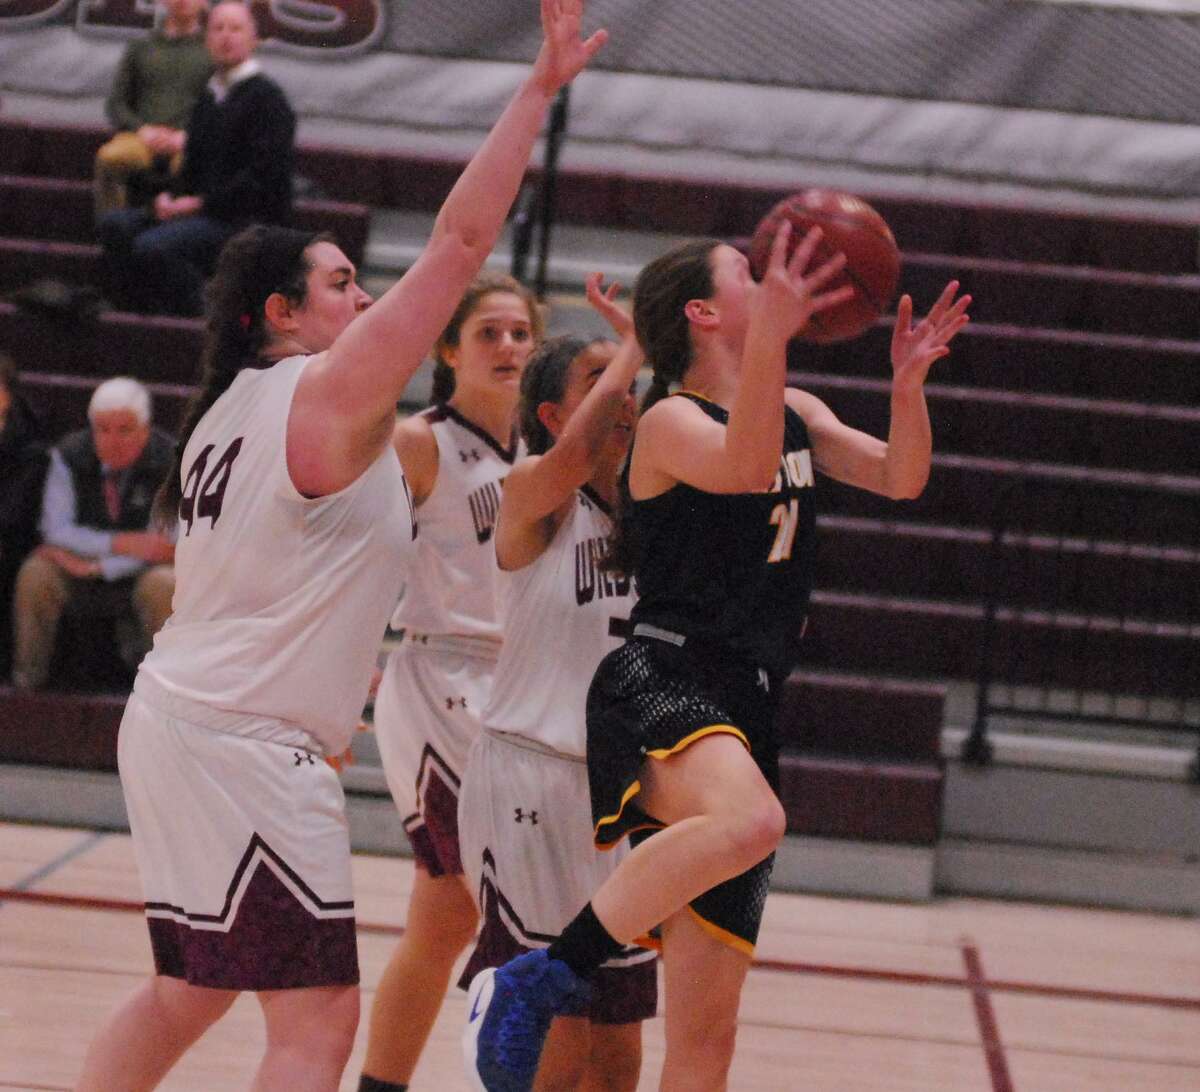 Weston's Kate Joyce converts a layup during a game against Bethel on Tuesday.